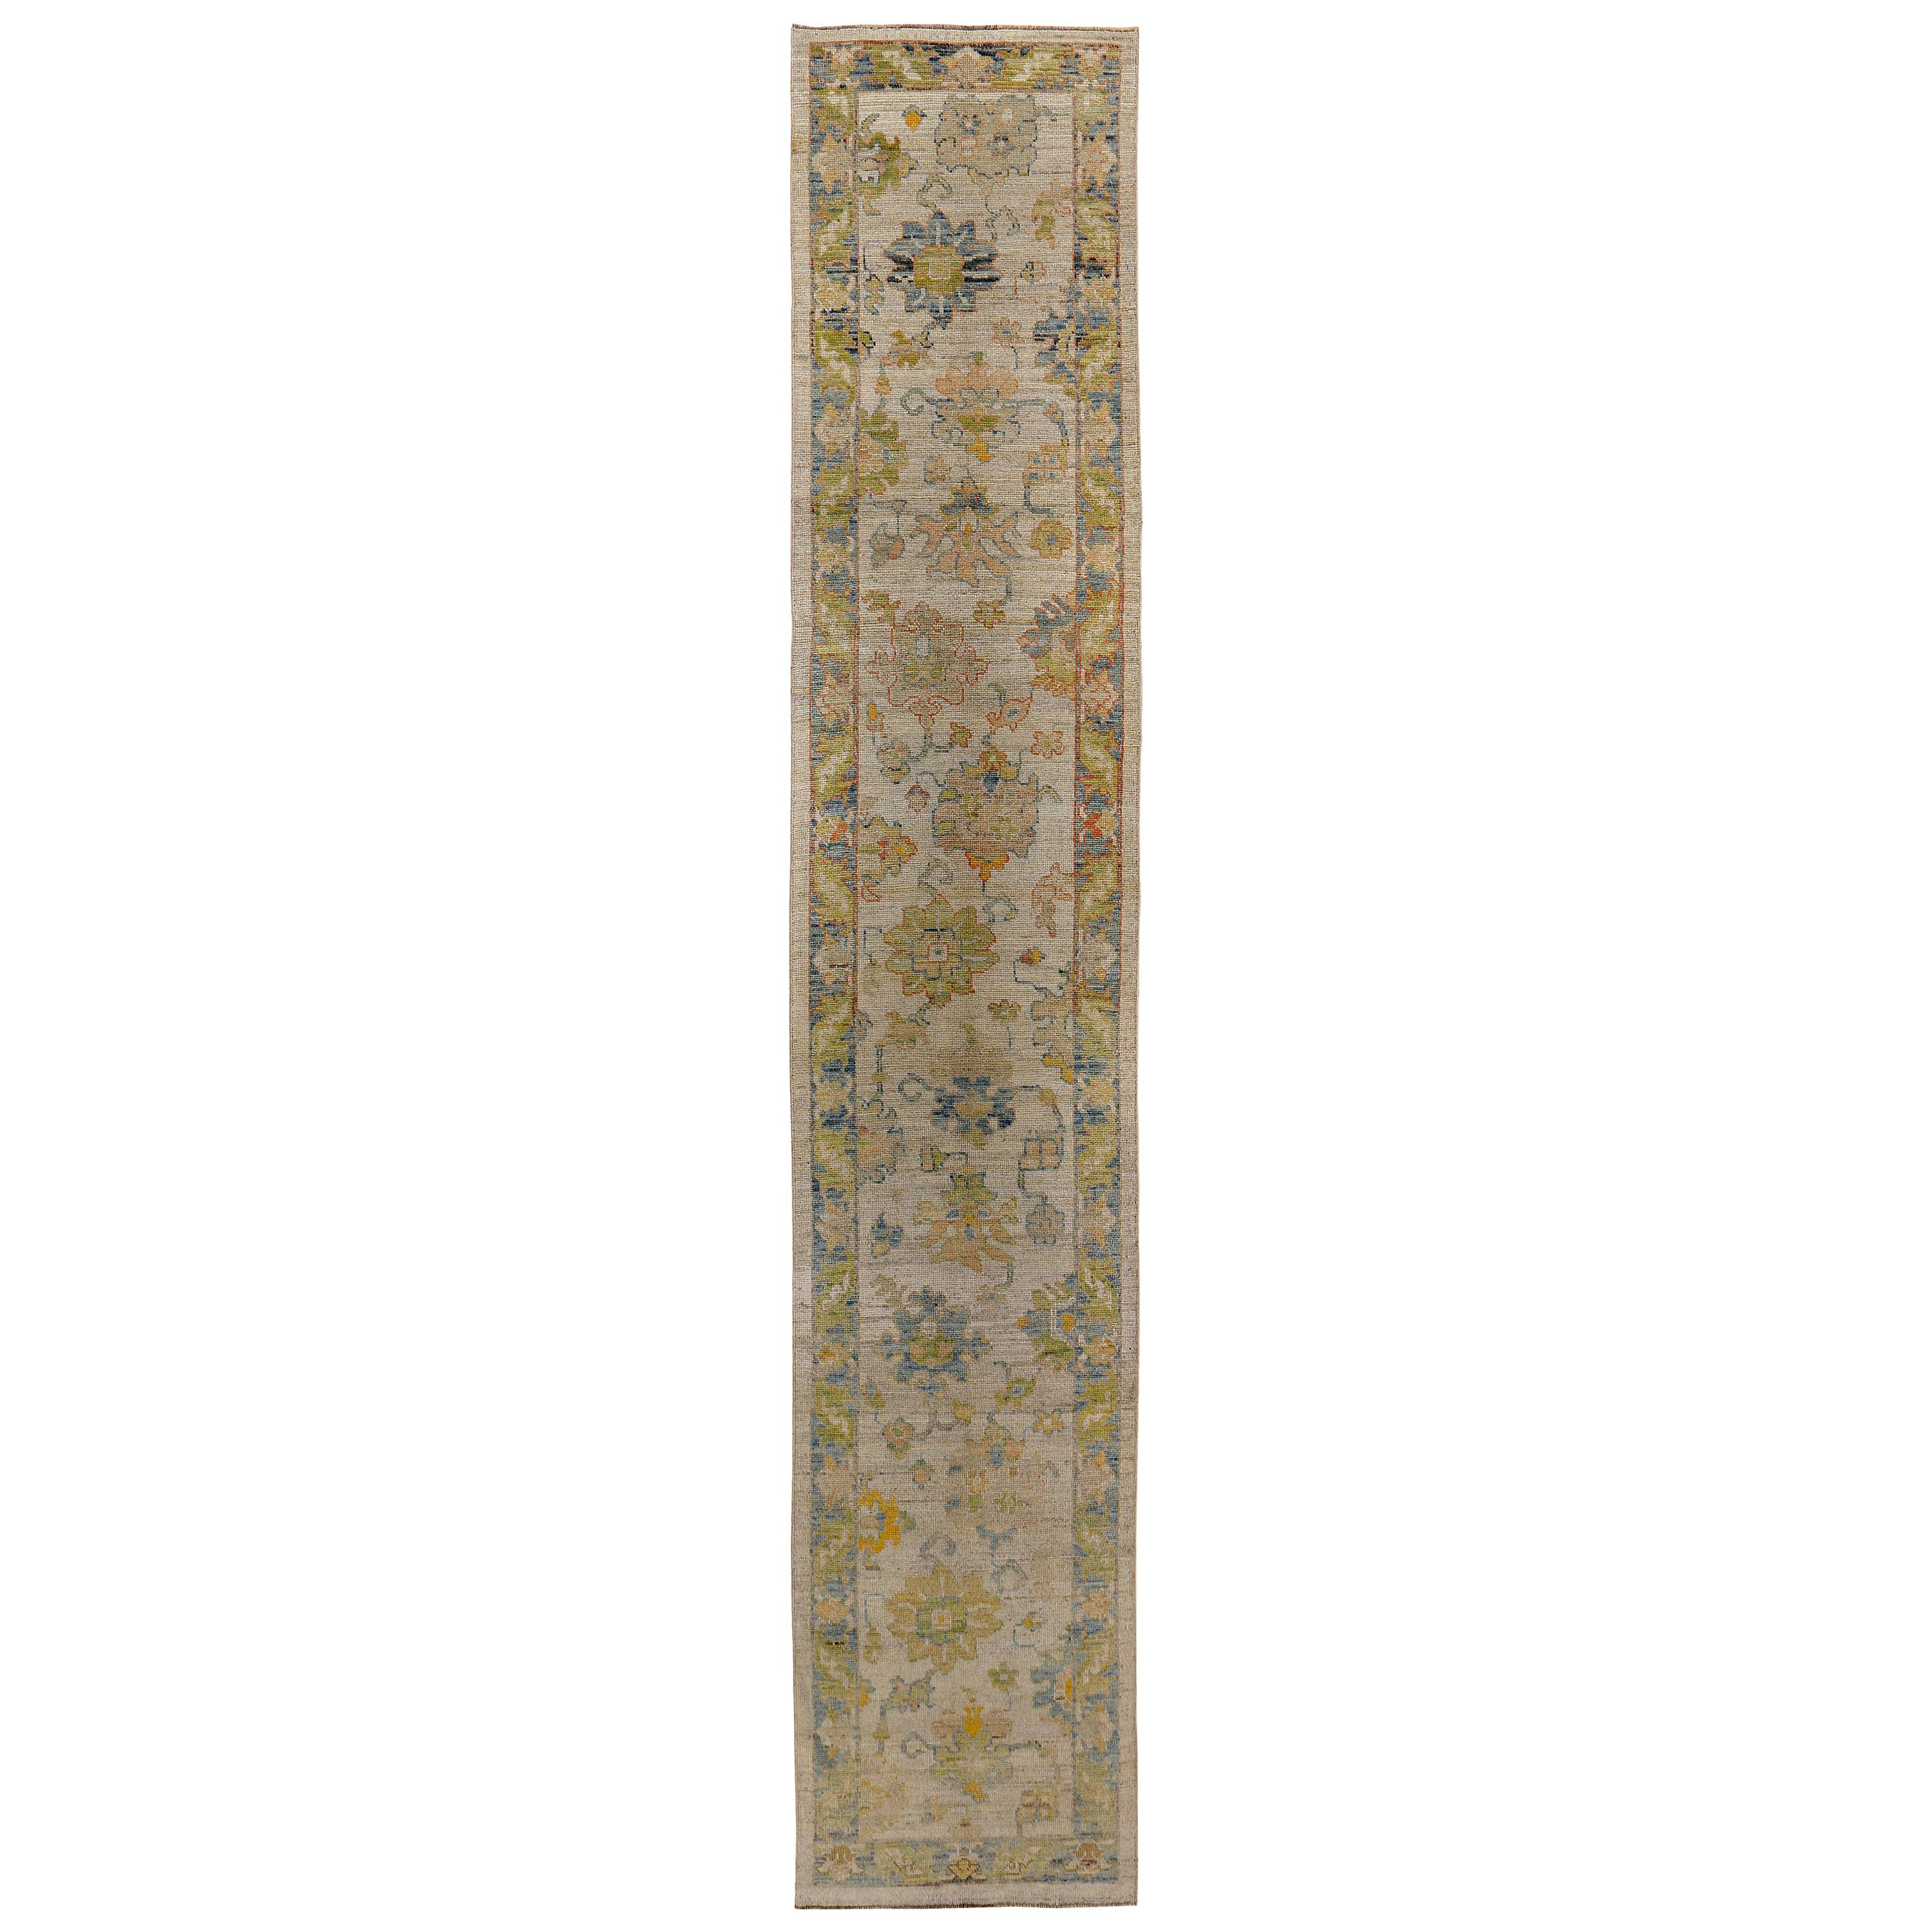 Turkish Oushak Runner Rug with Navy and Green Floral Heads on Ivory Field